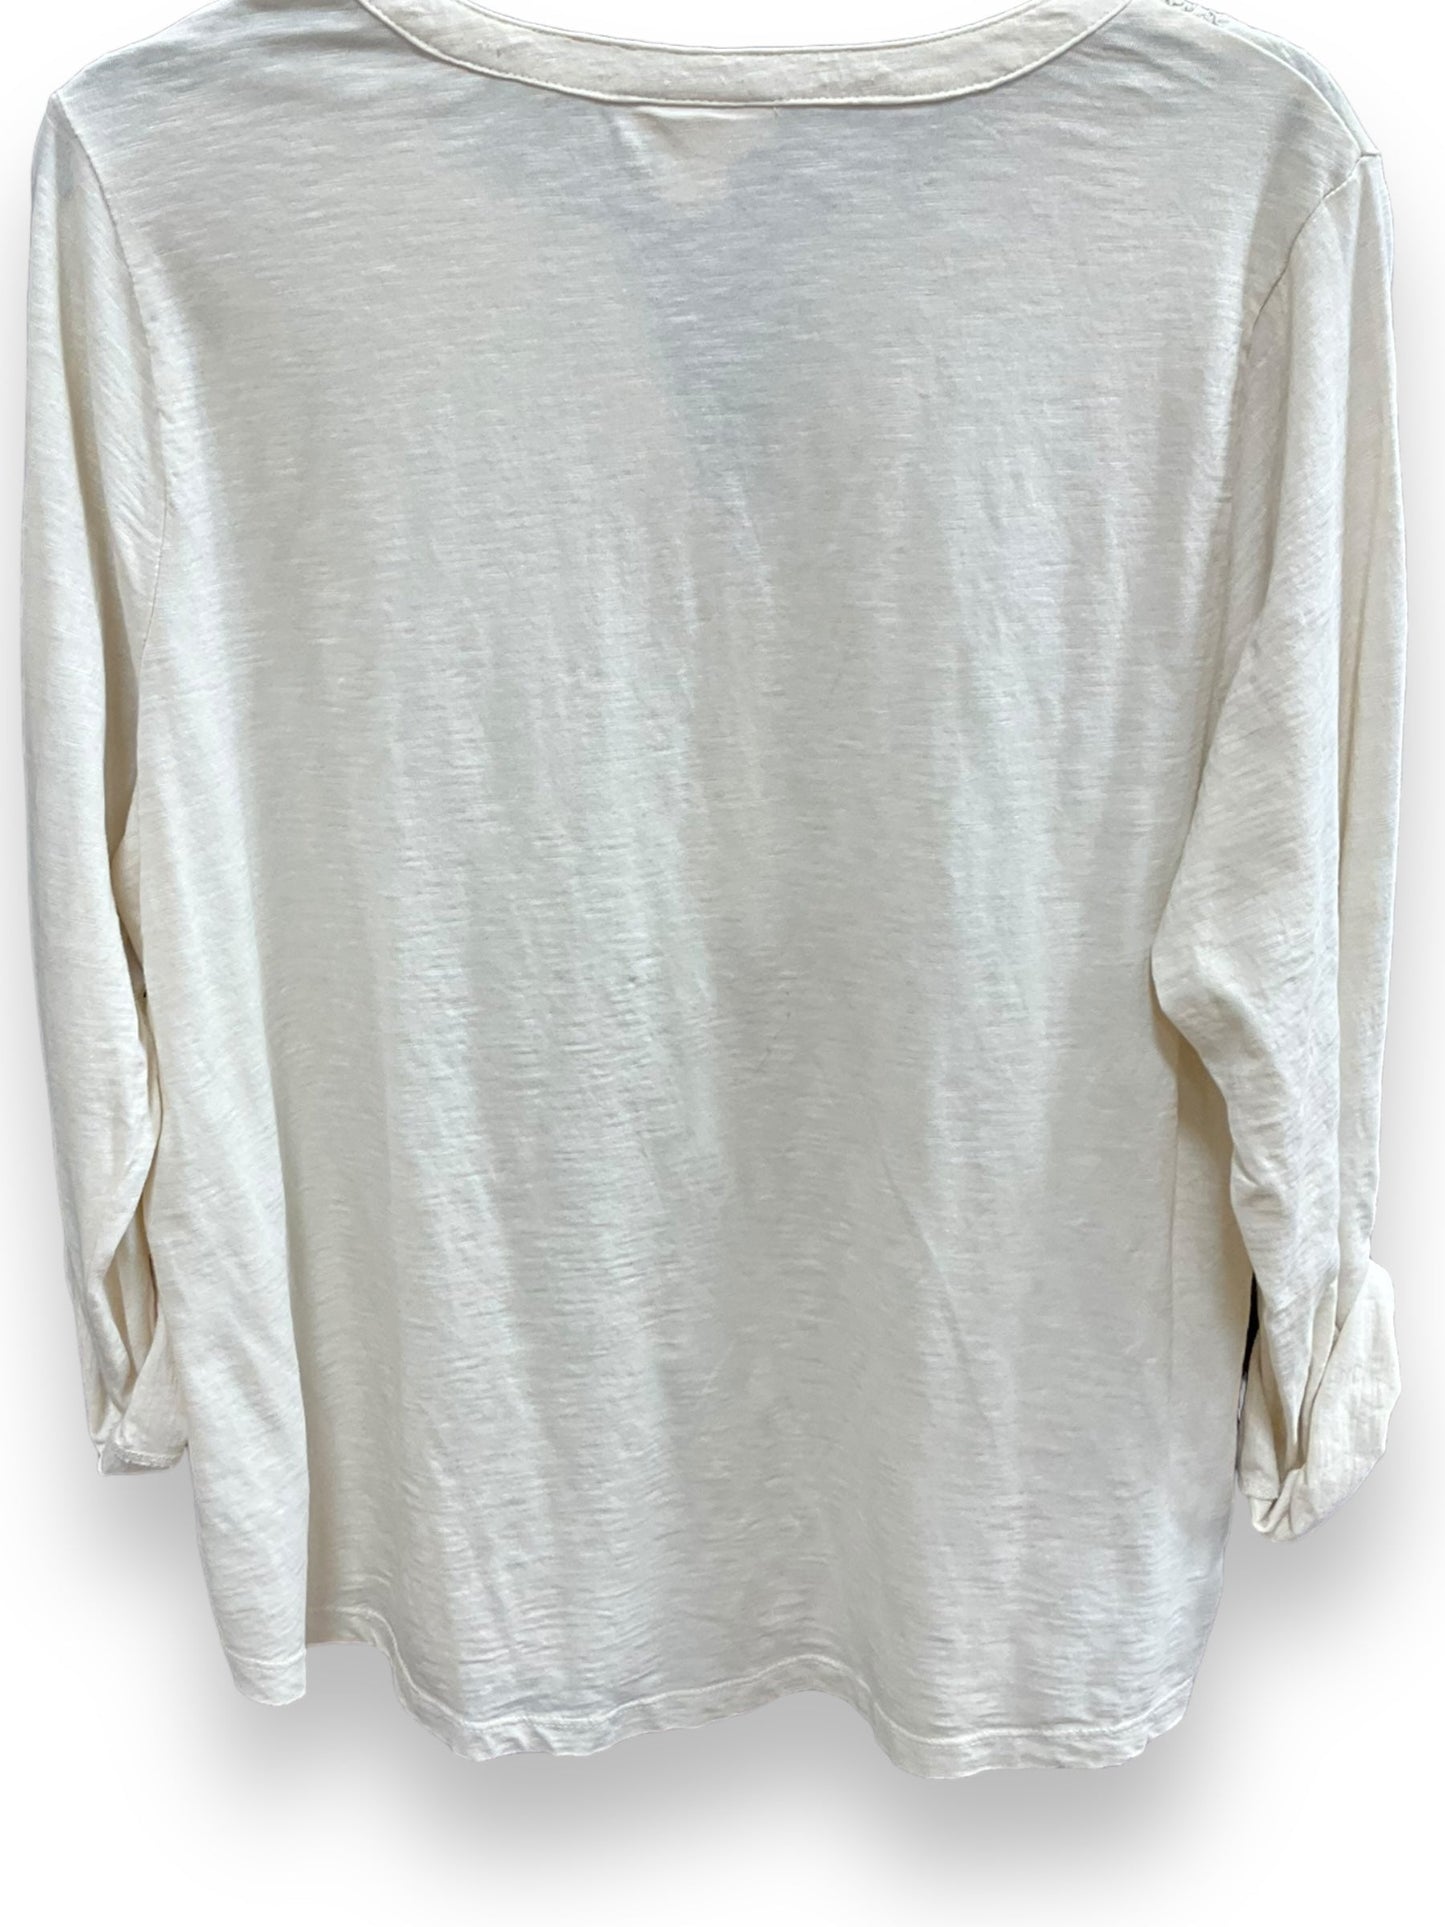 Cream Top Long Sleeve Style And Company, Size Xl